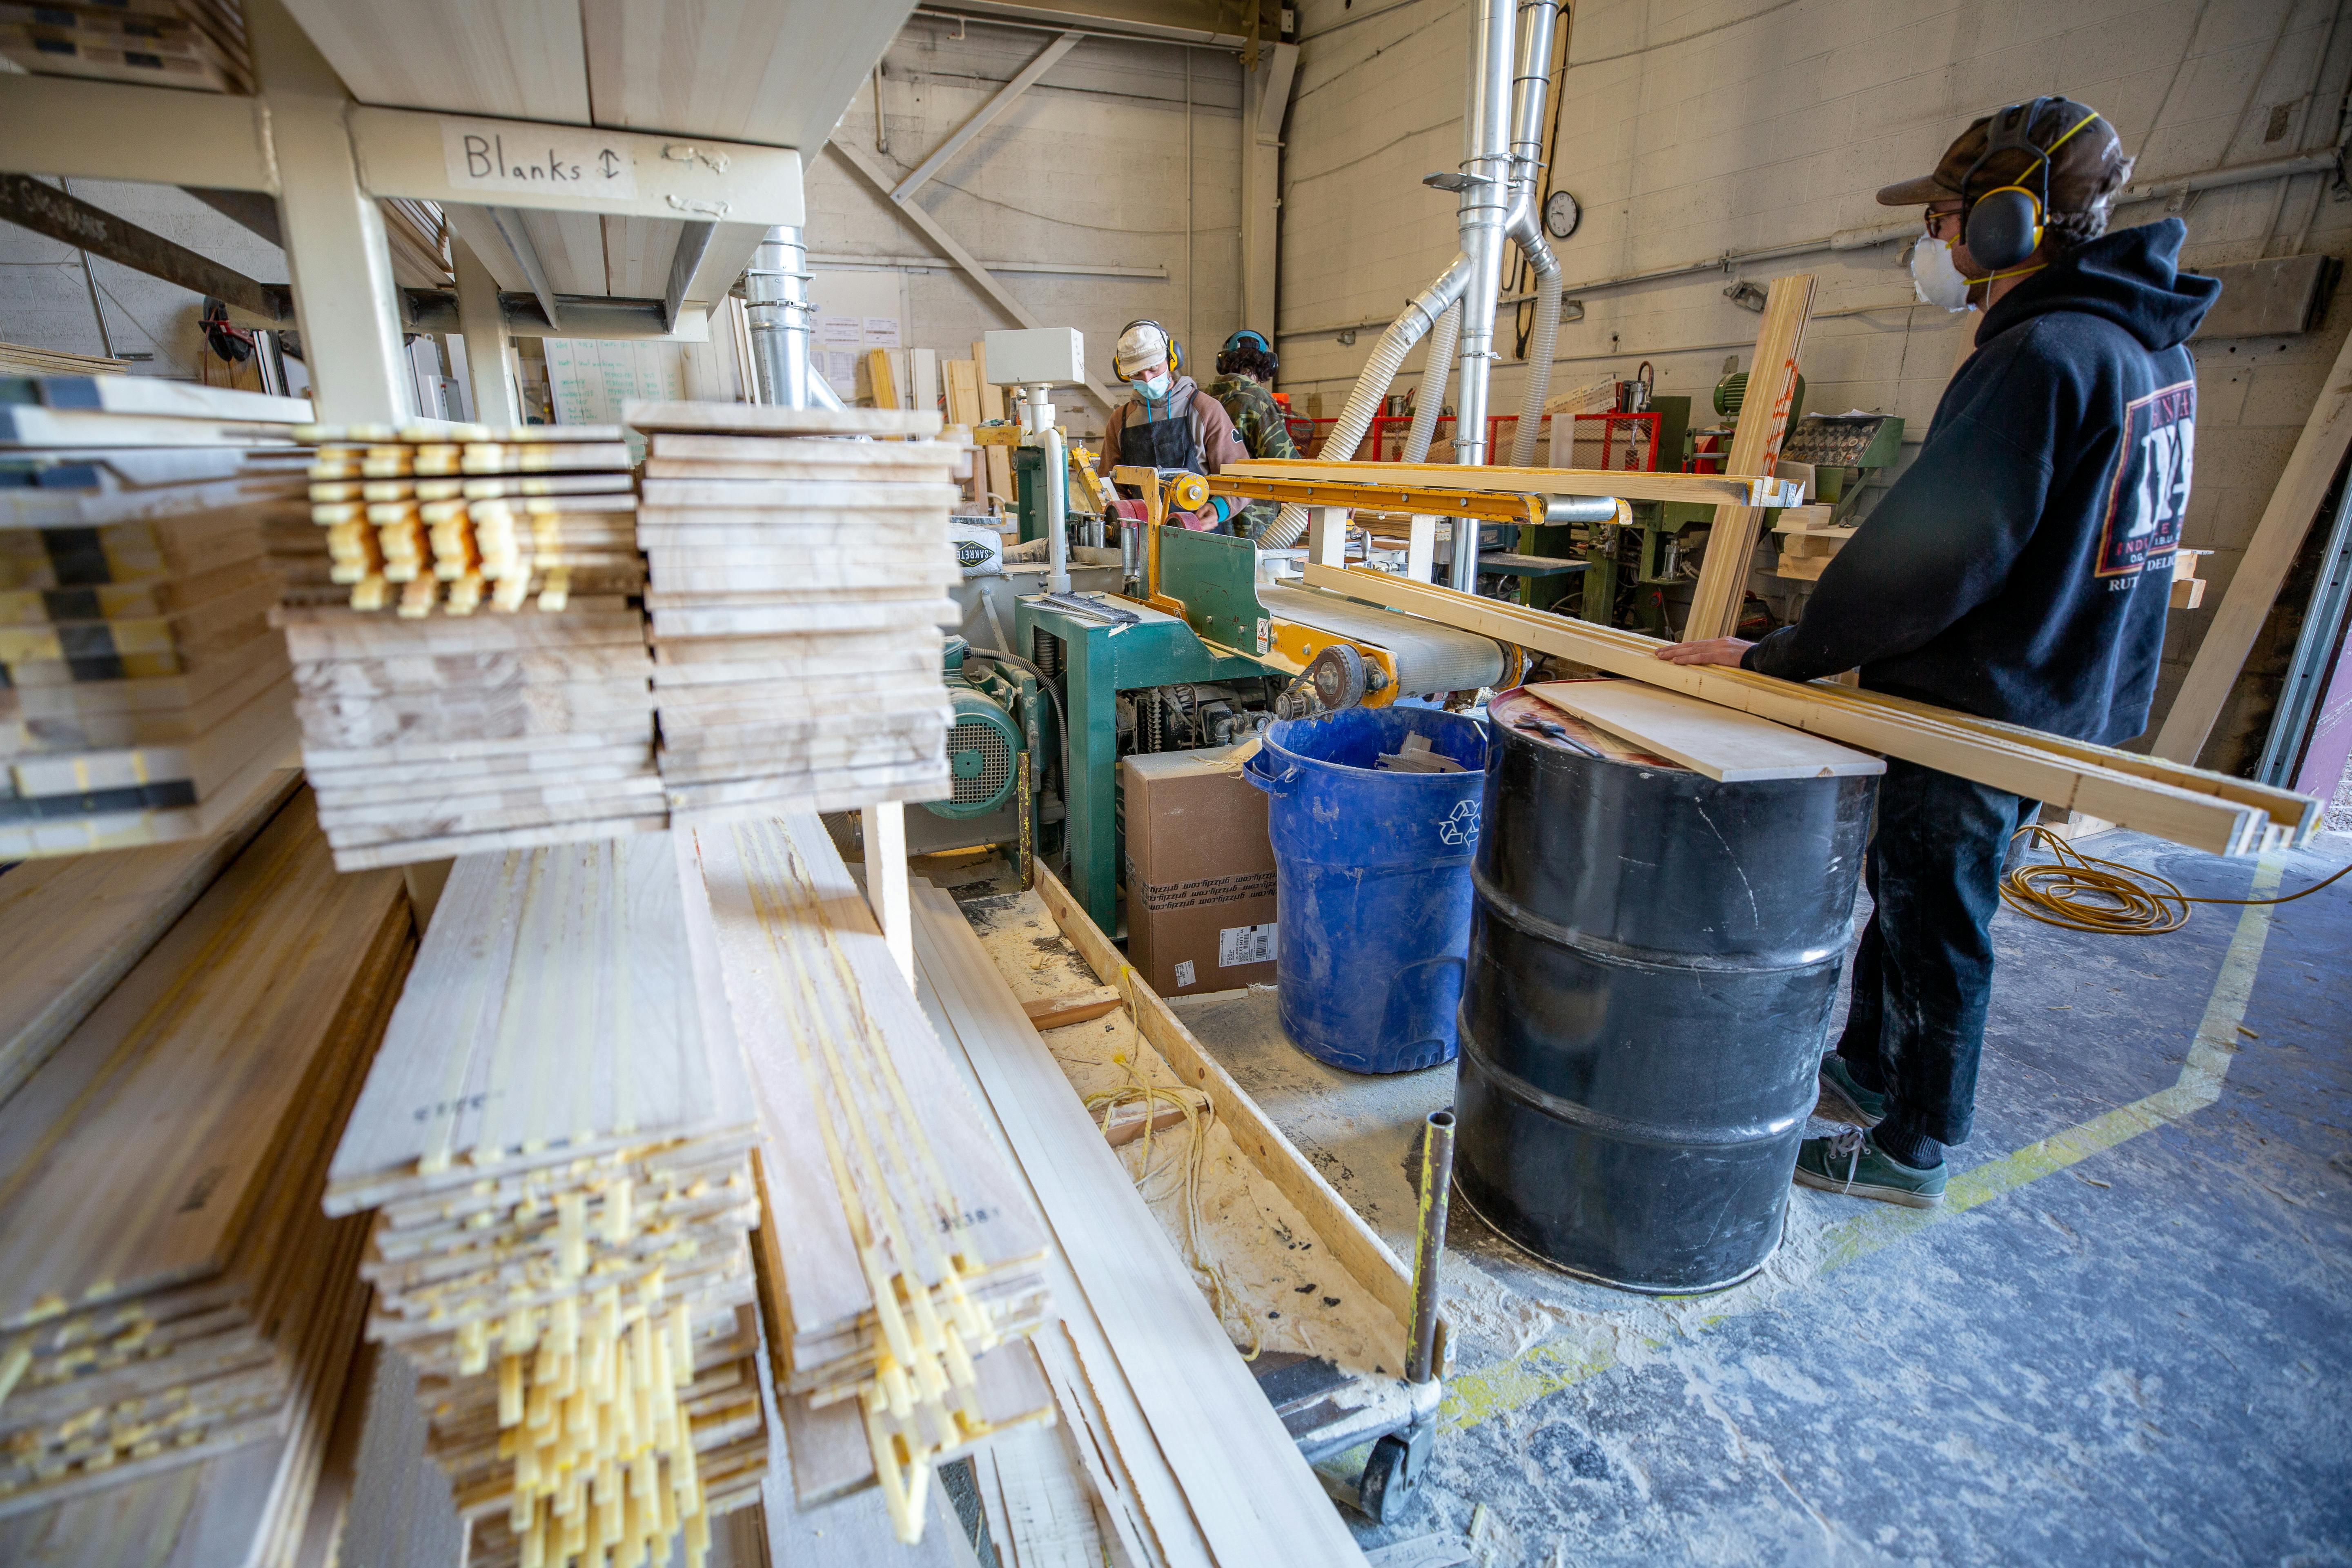 Piles of wooden ski cores in the DPS Skis factory